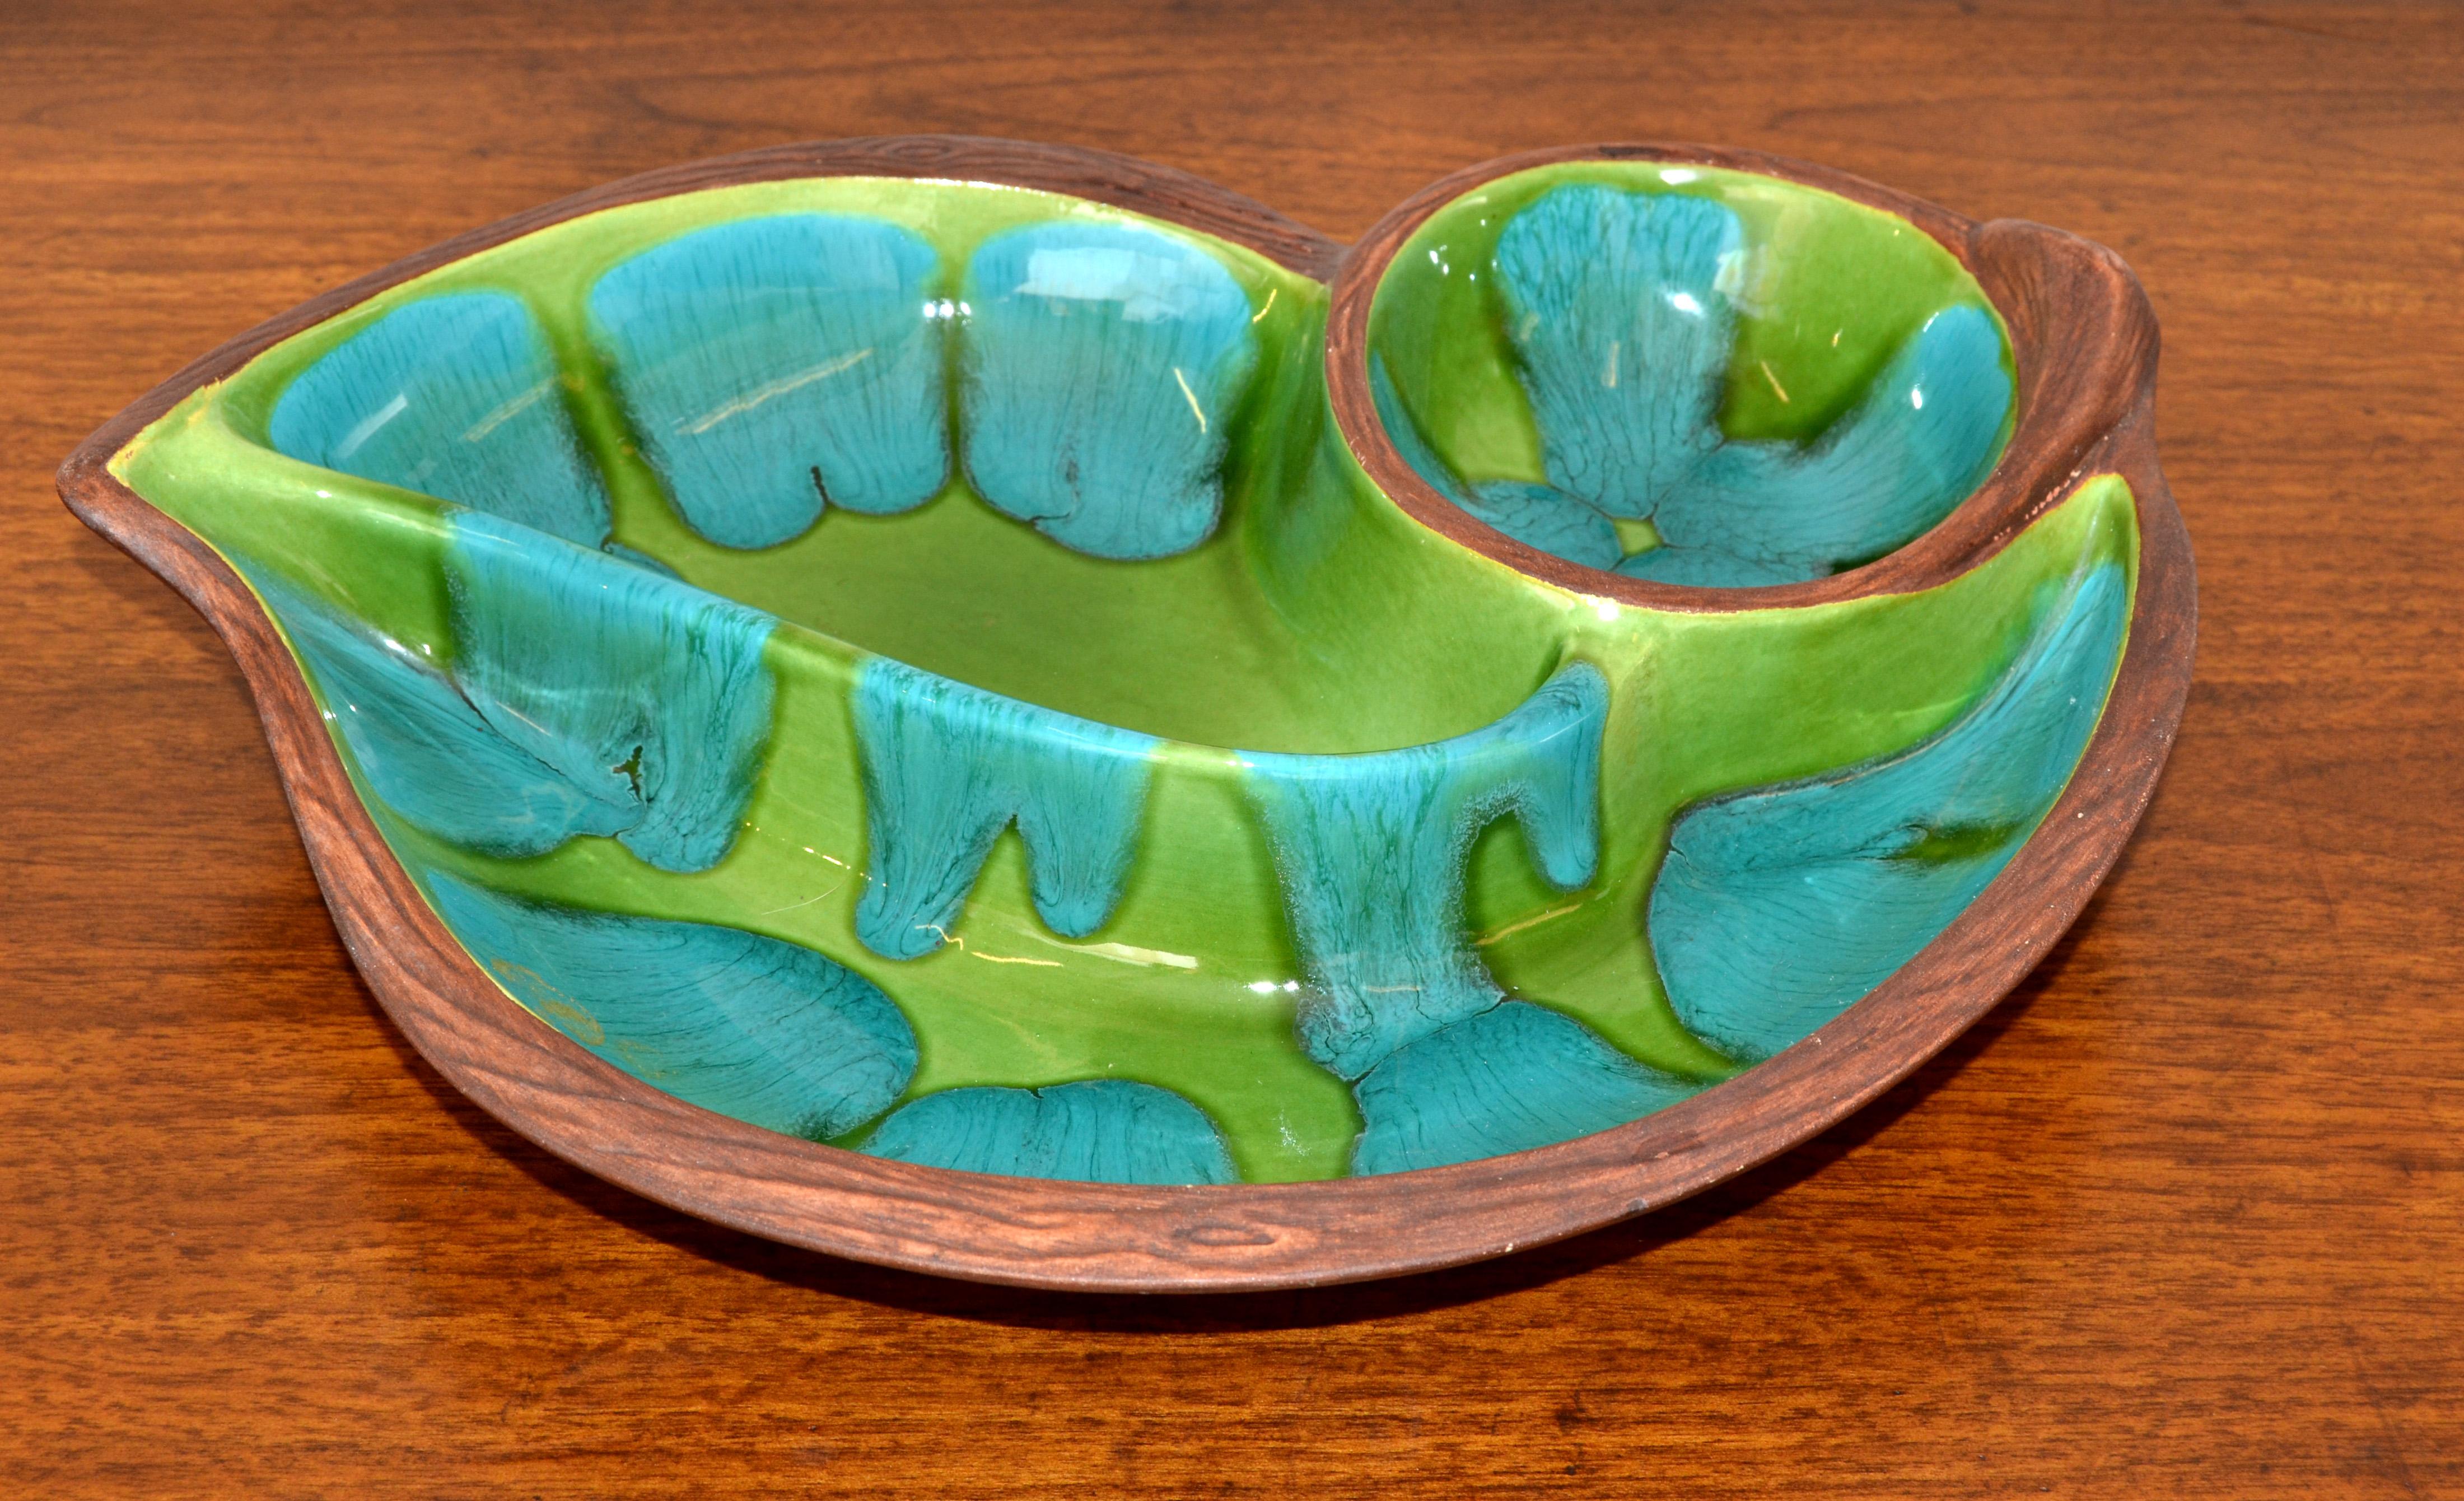 Brown Green Turquoise Glazed Ceramic Pottery Dish Mid-Century Modern, USA For Sale 2